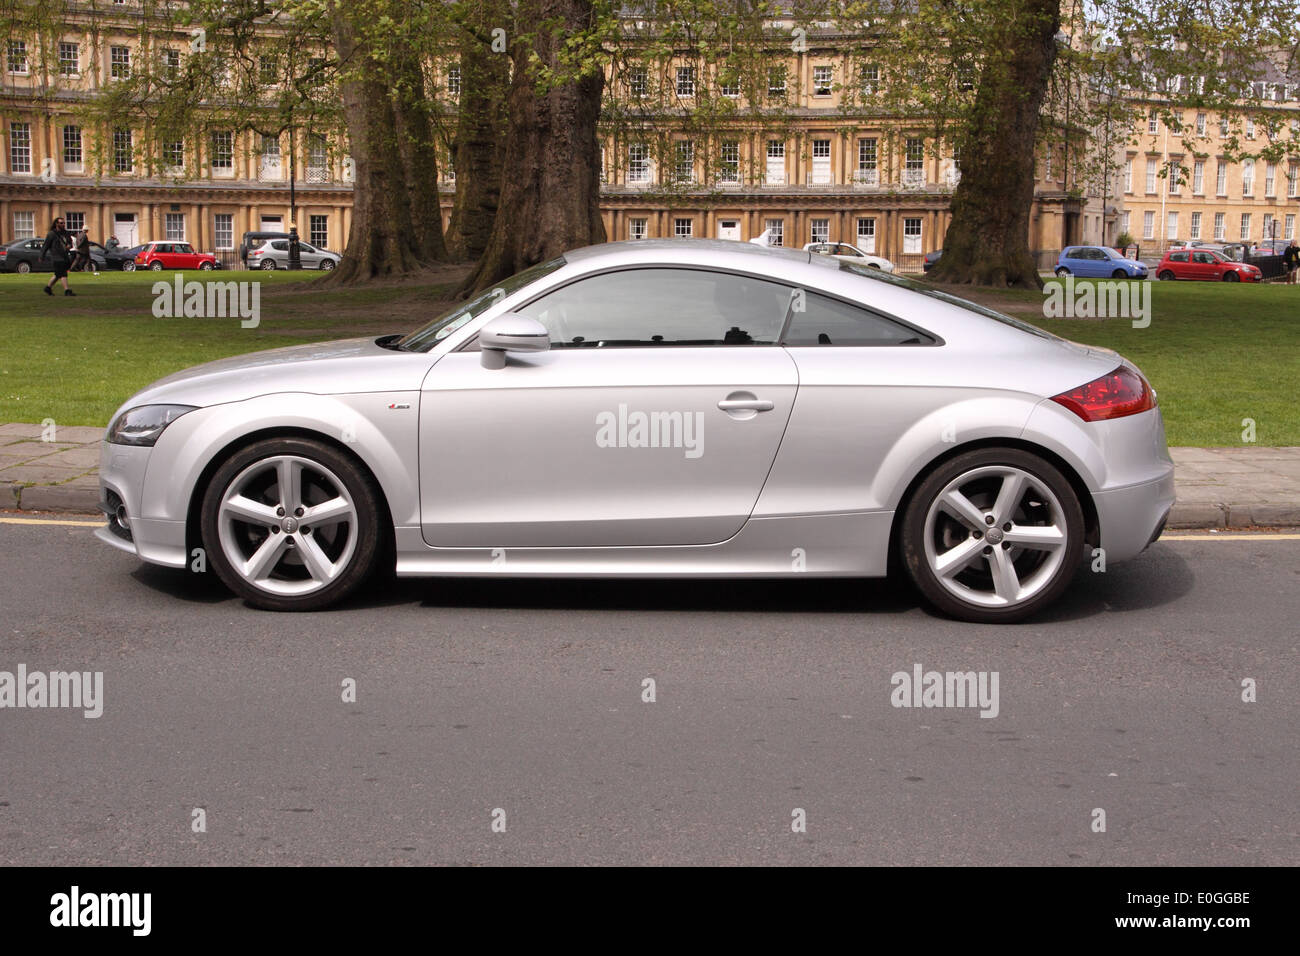 Audi TT Quattro TDI silver coupe car parked in The Circus in Bath city England UK Stock Photo